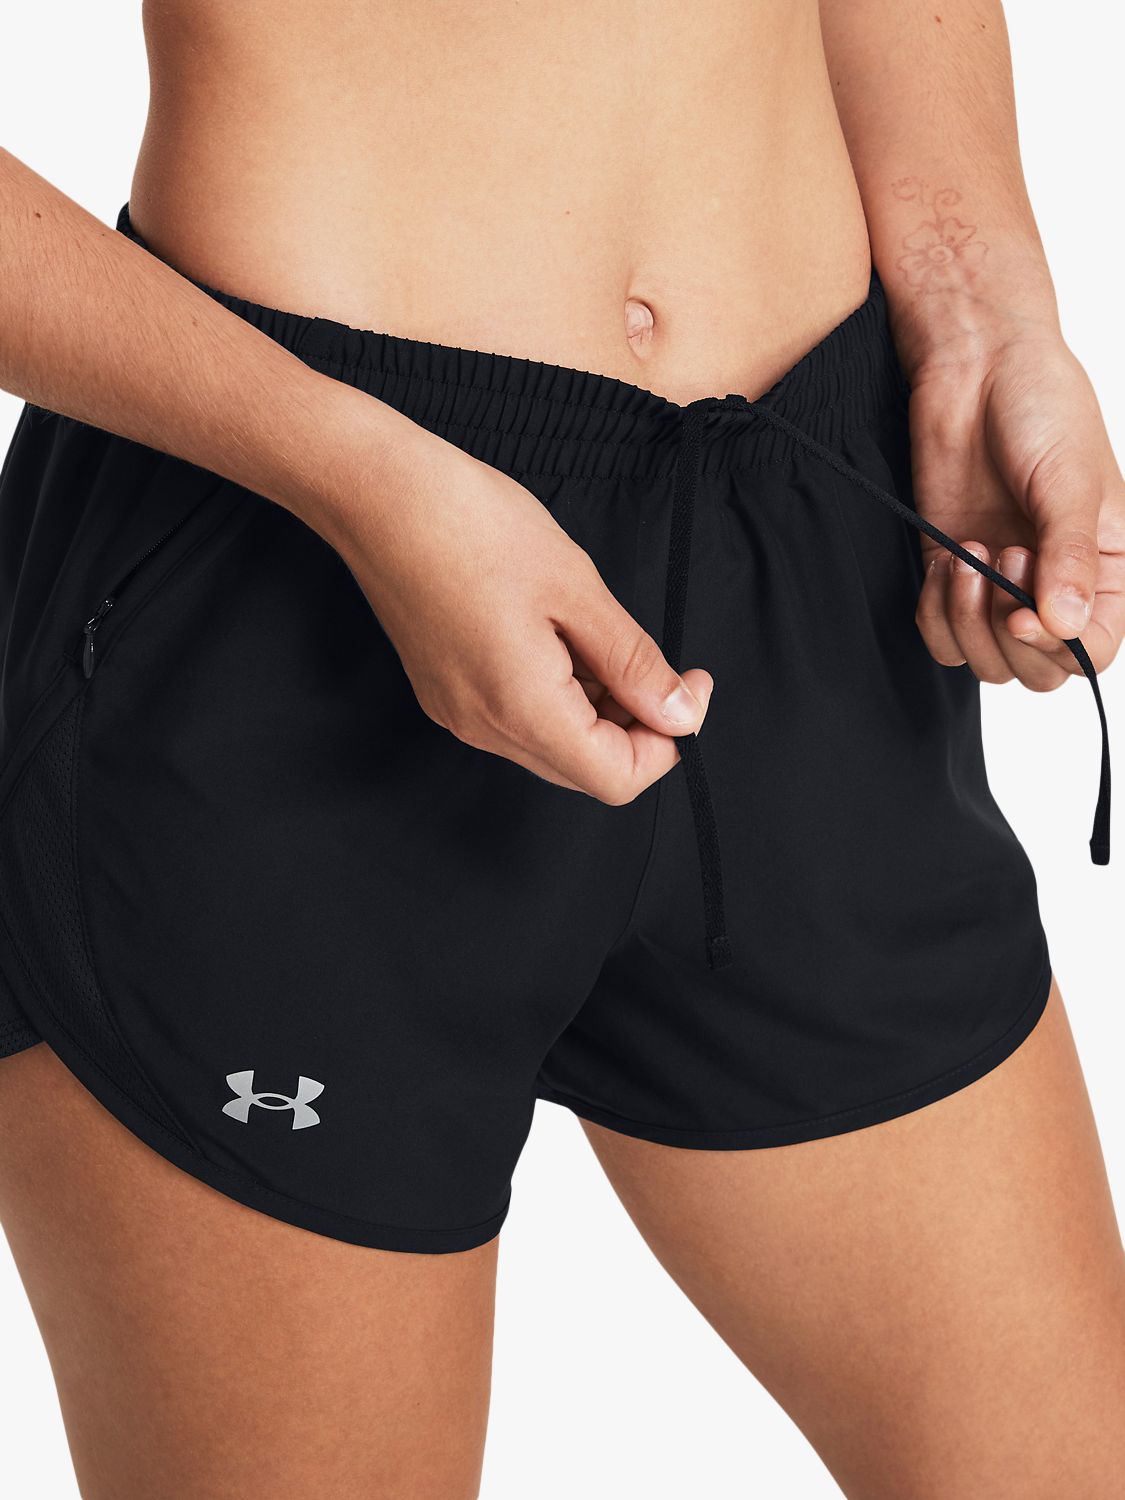 Under Armour Fly-By 3" Women's Running Shorts, Black/Reflective, XS